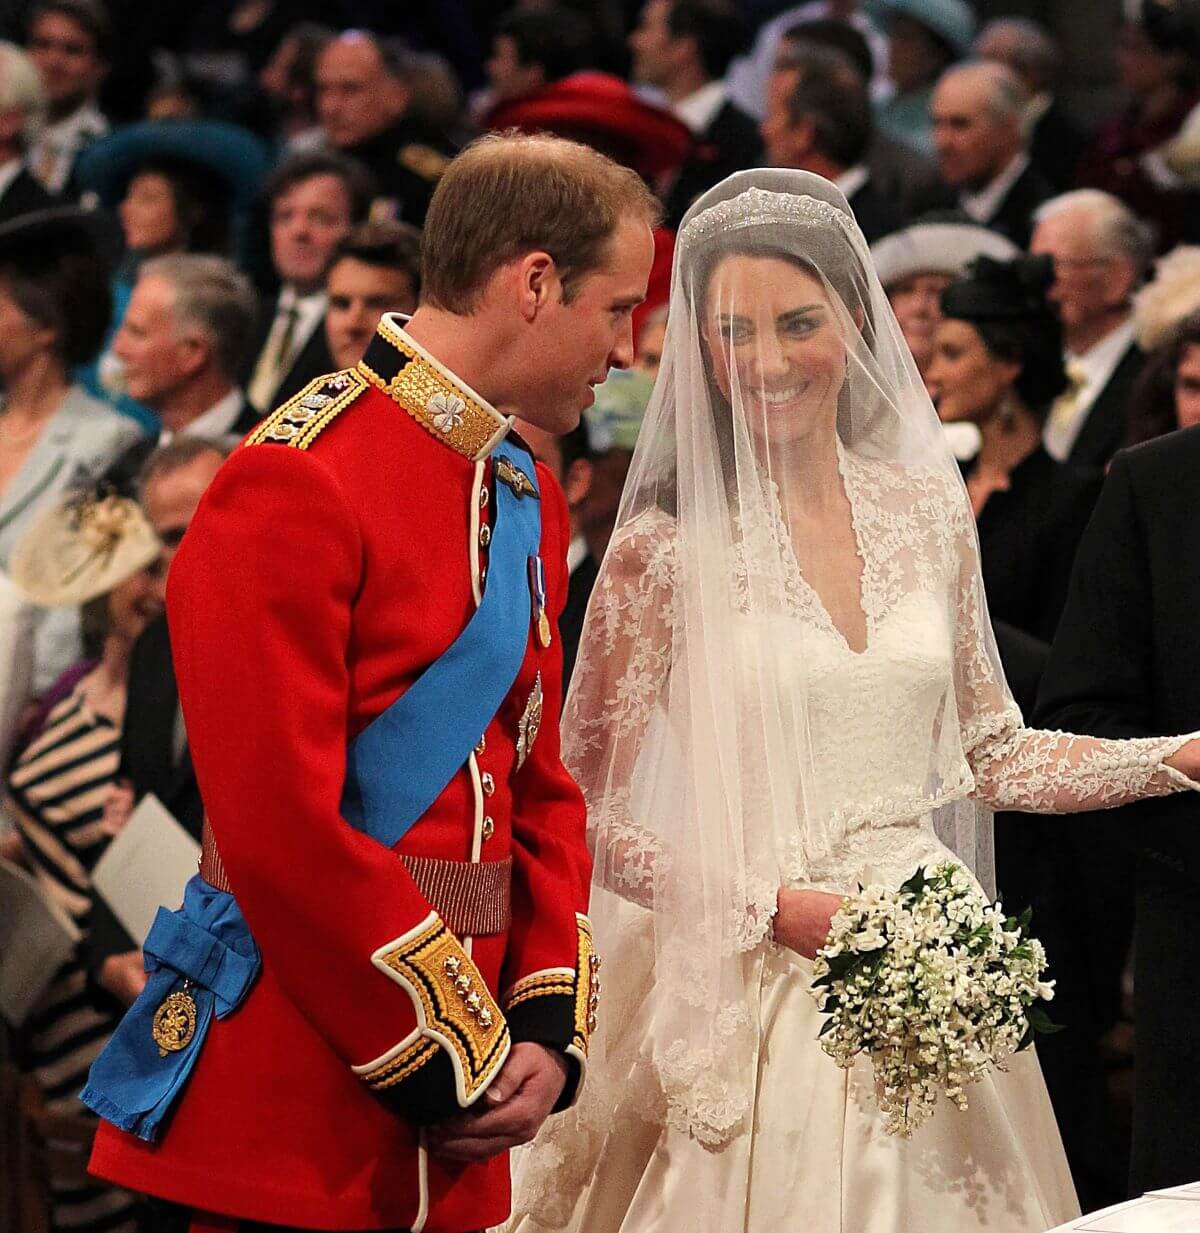 Prince William speaks to his bride Kate Middleton during their wedding ceremony at Westminster Abbey